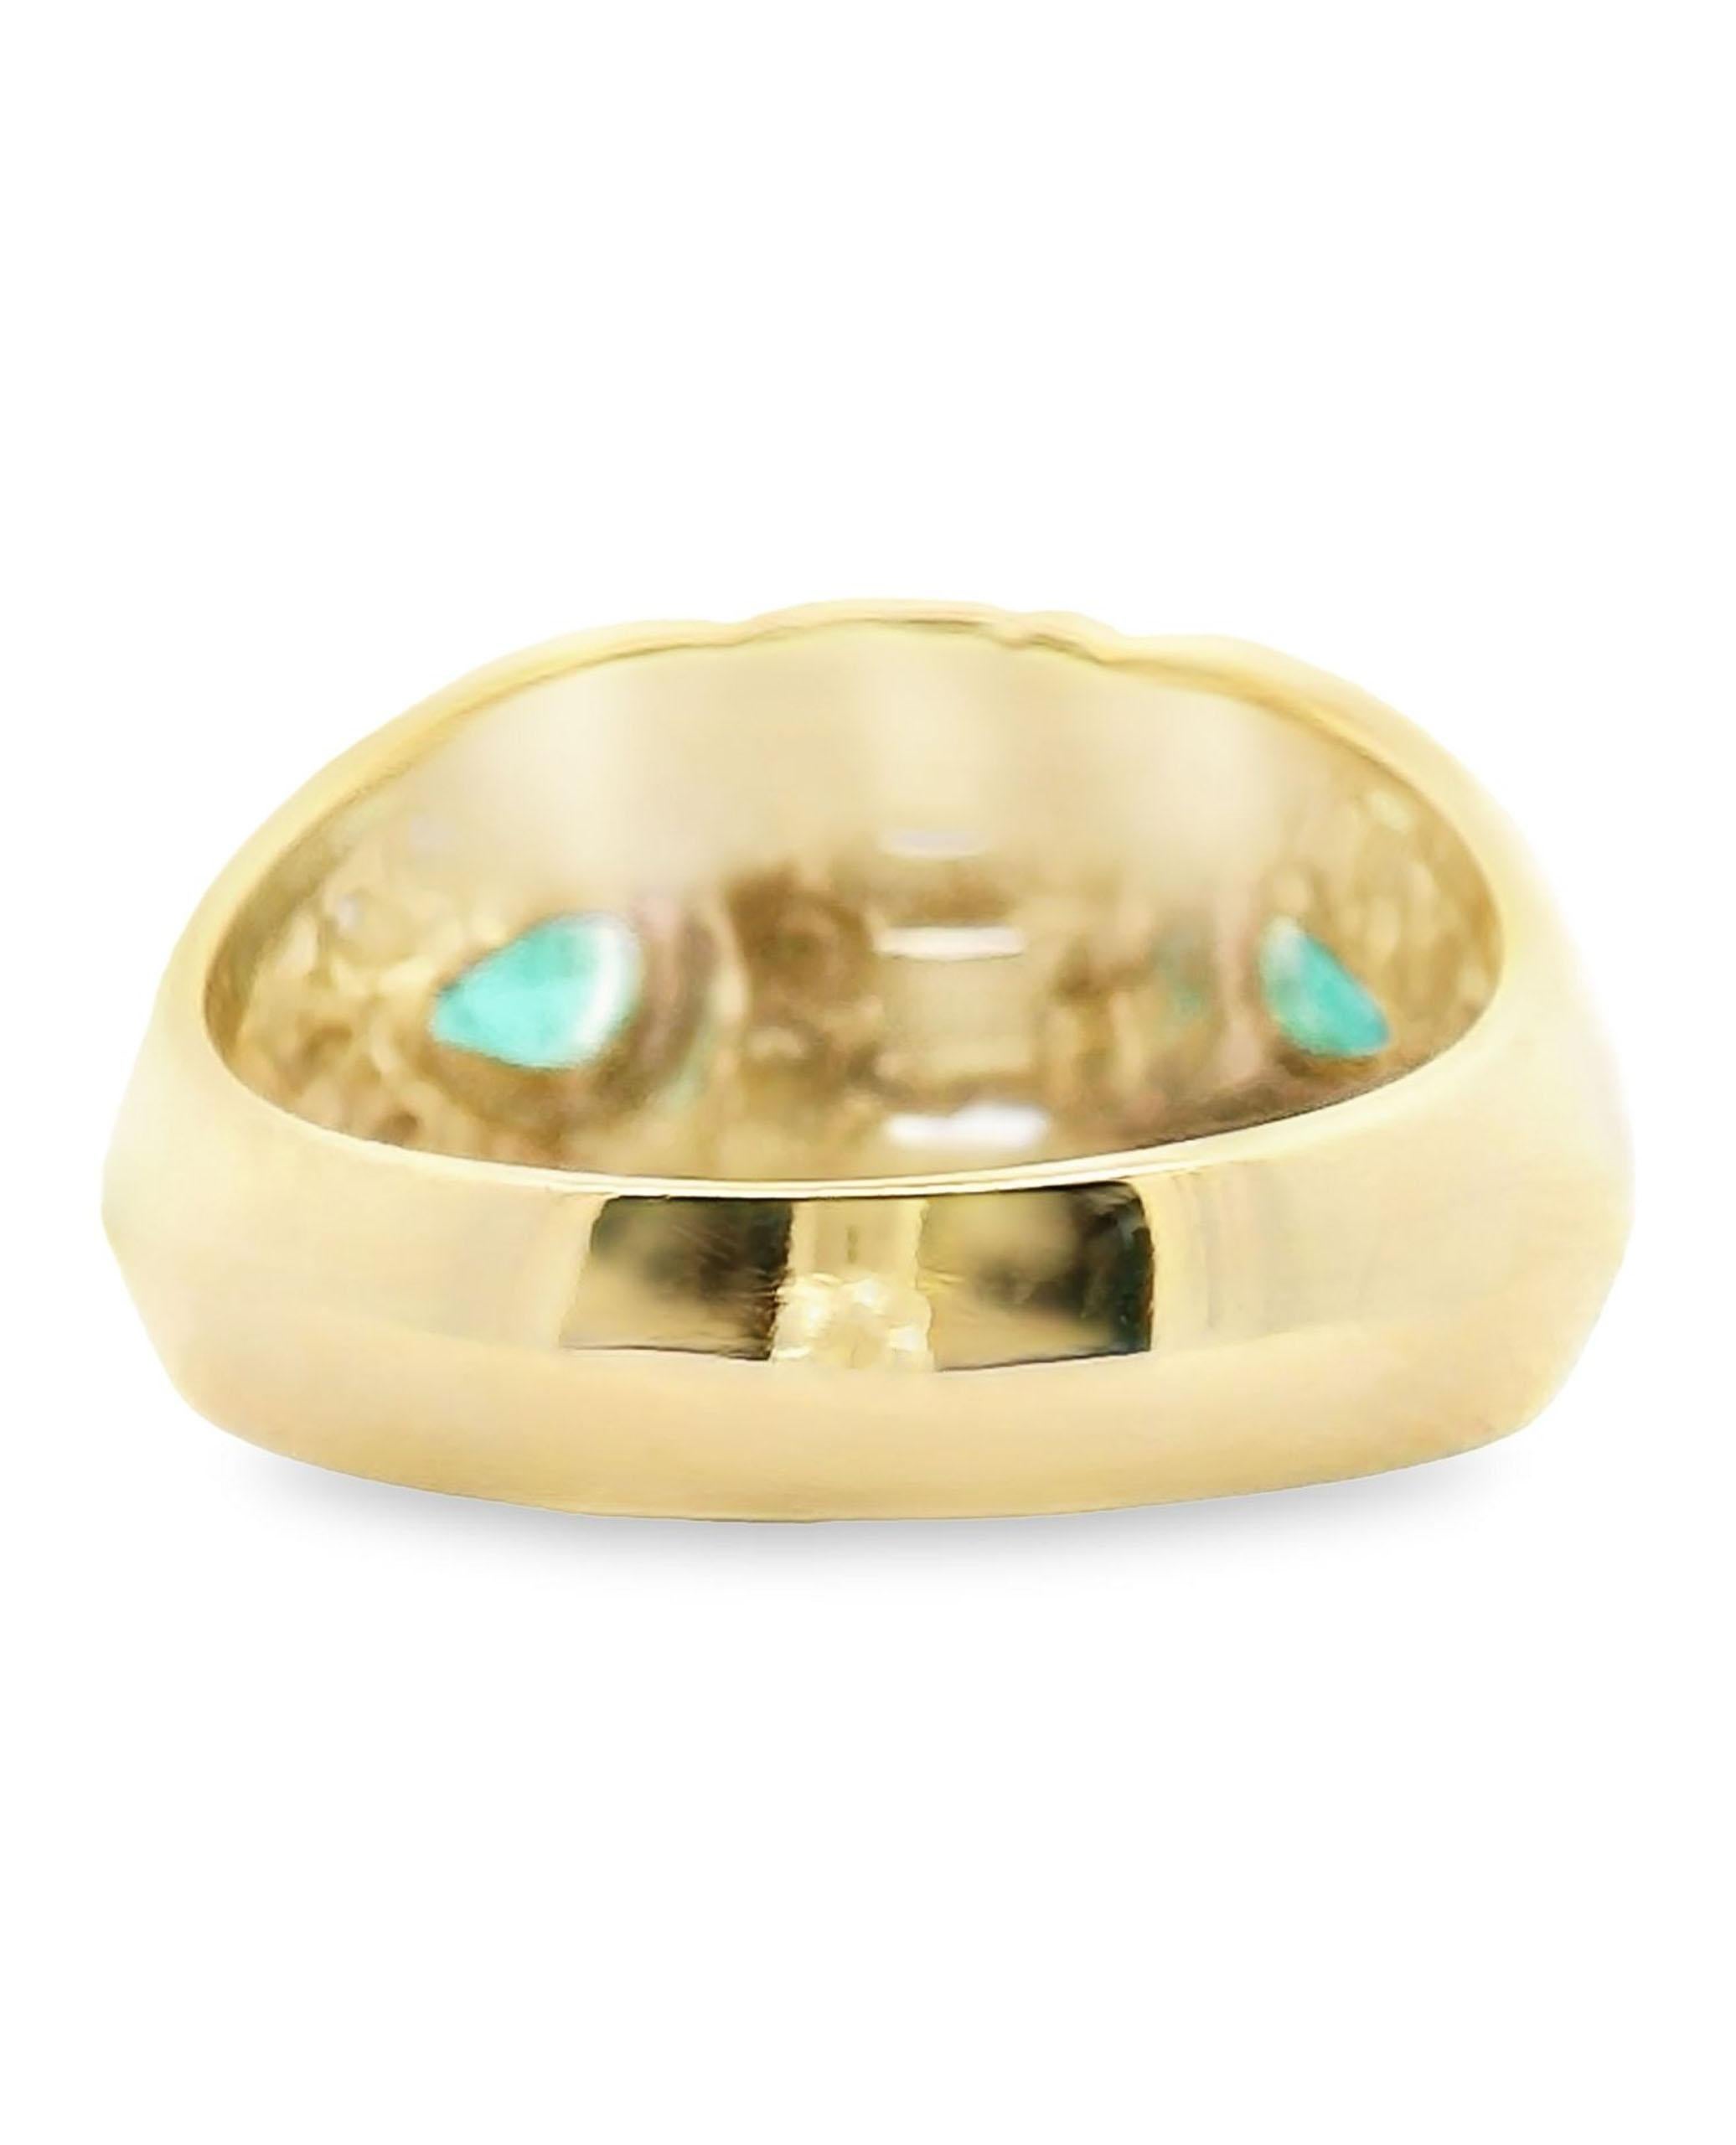 Women's Vintage Emerald Ring with Diamonds Set in 18K Gold - Circa 1985 For Sale